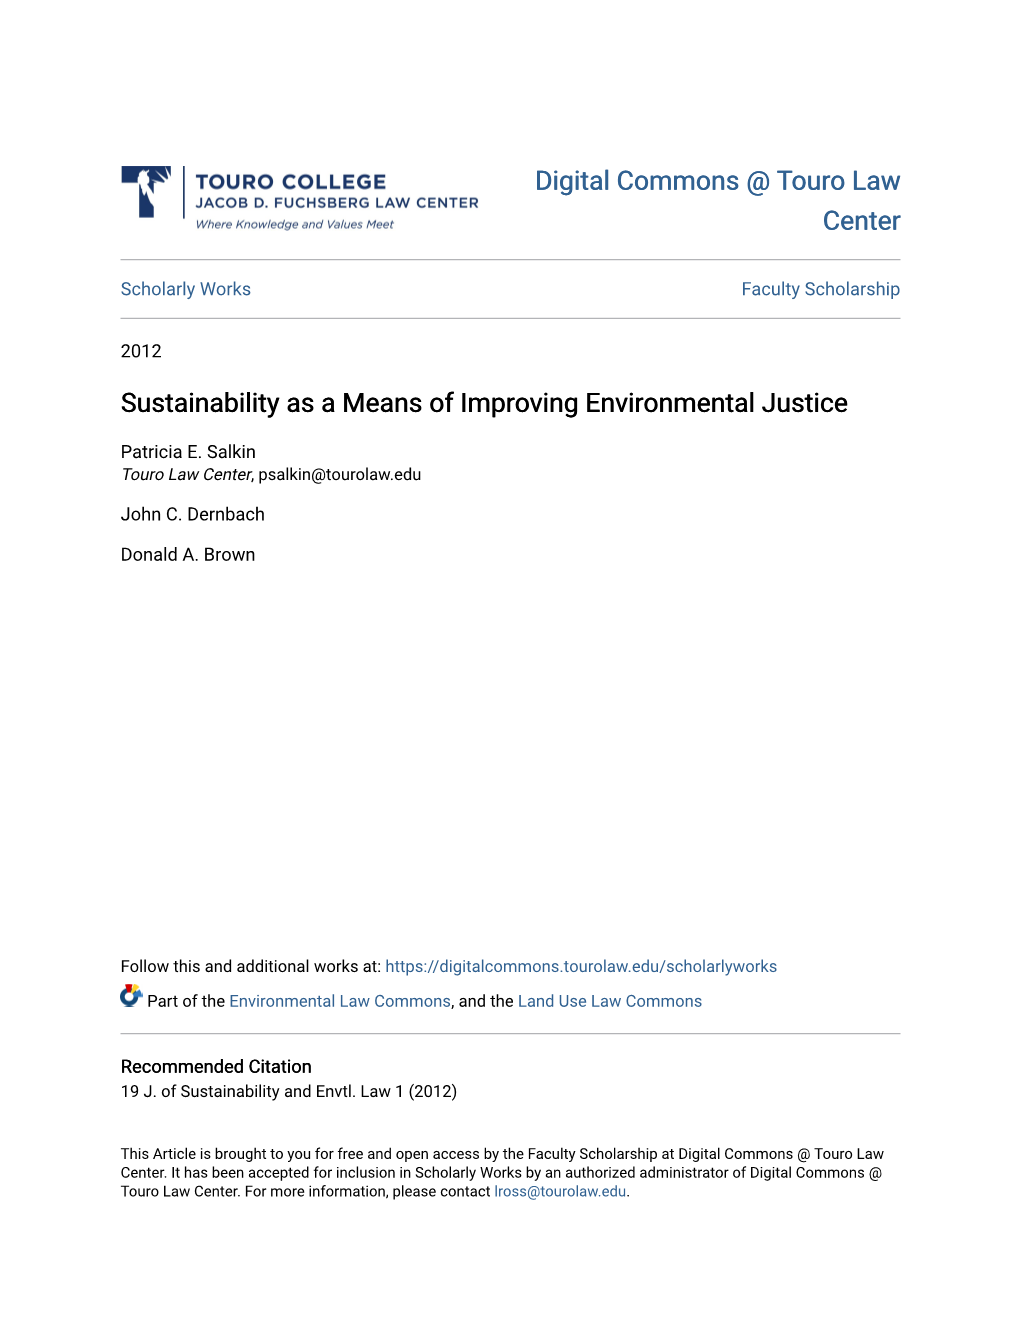 Sustainability As a Means of Improving Environmental Justice